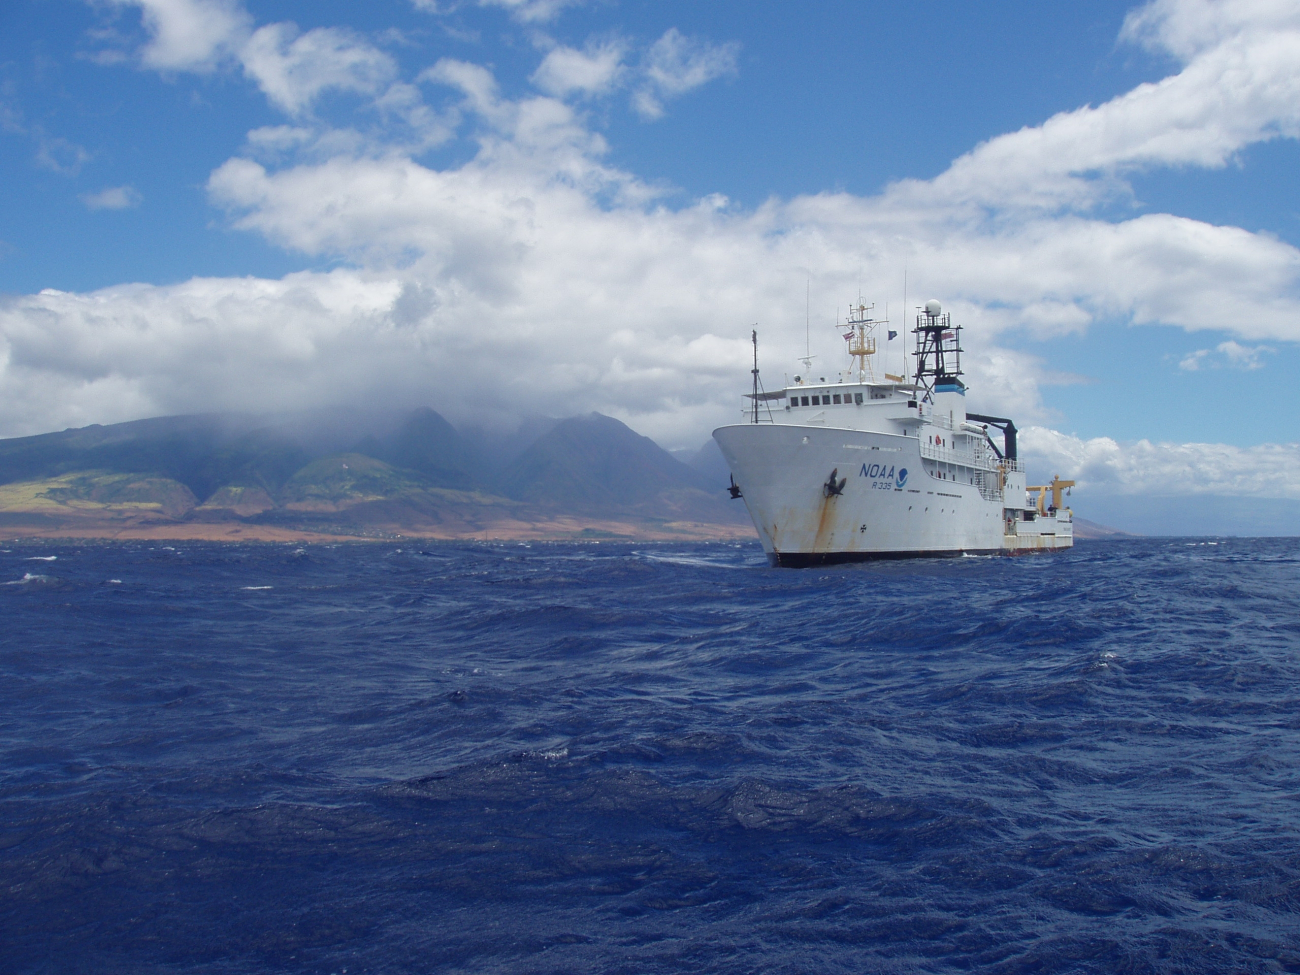 NOAA Ship OSCAR ELTON SETTE during a lull in diving operations